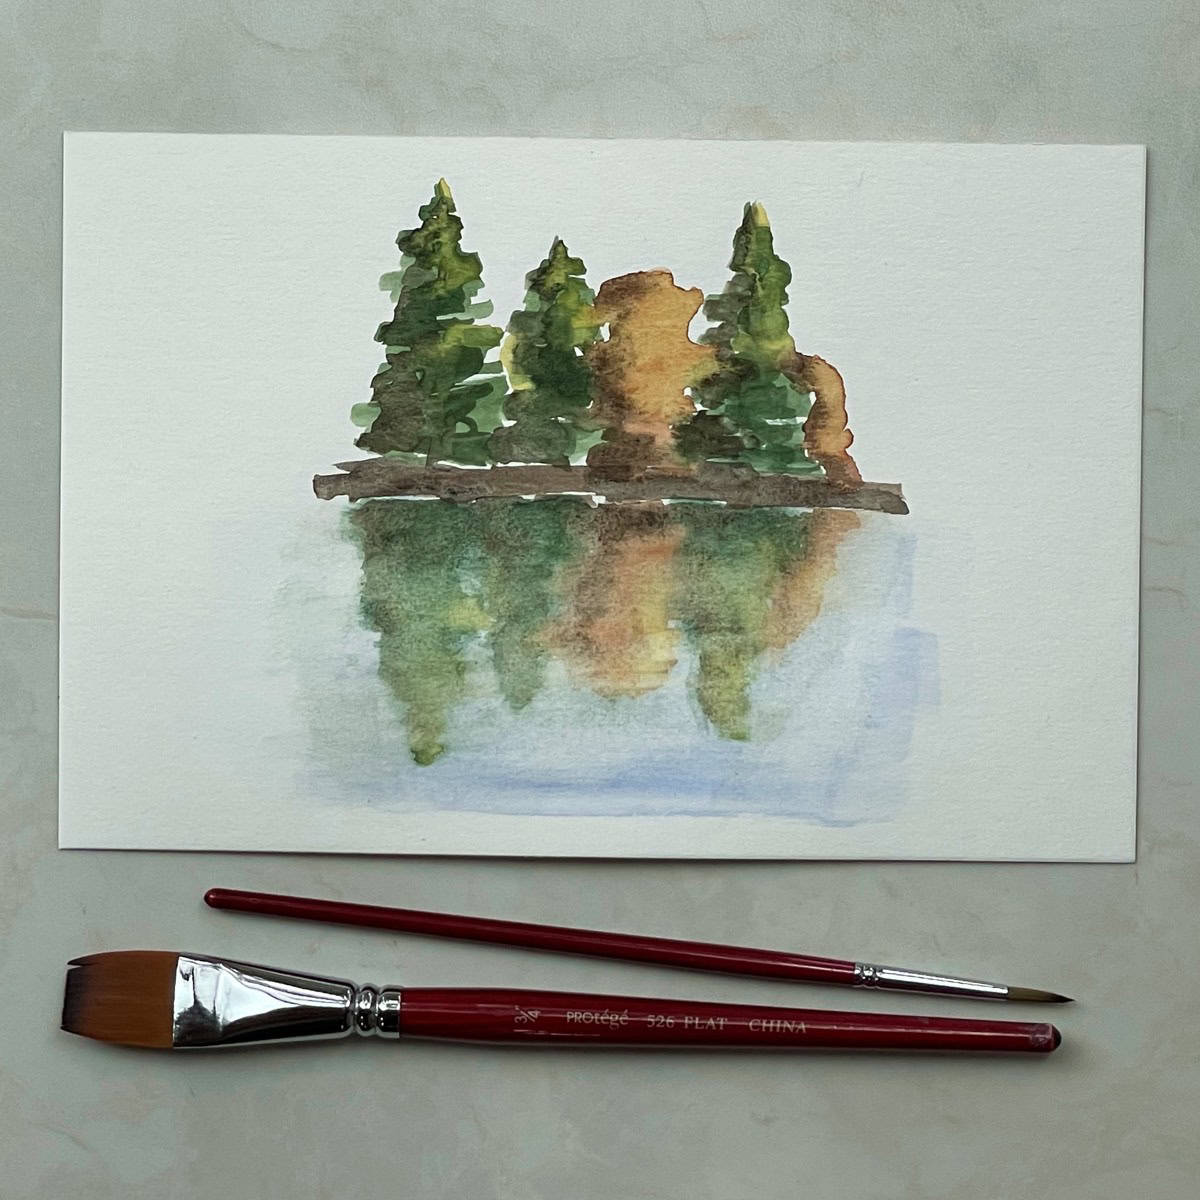 A painting of trees reflected on water in watercolor paint next to some paint brushes.